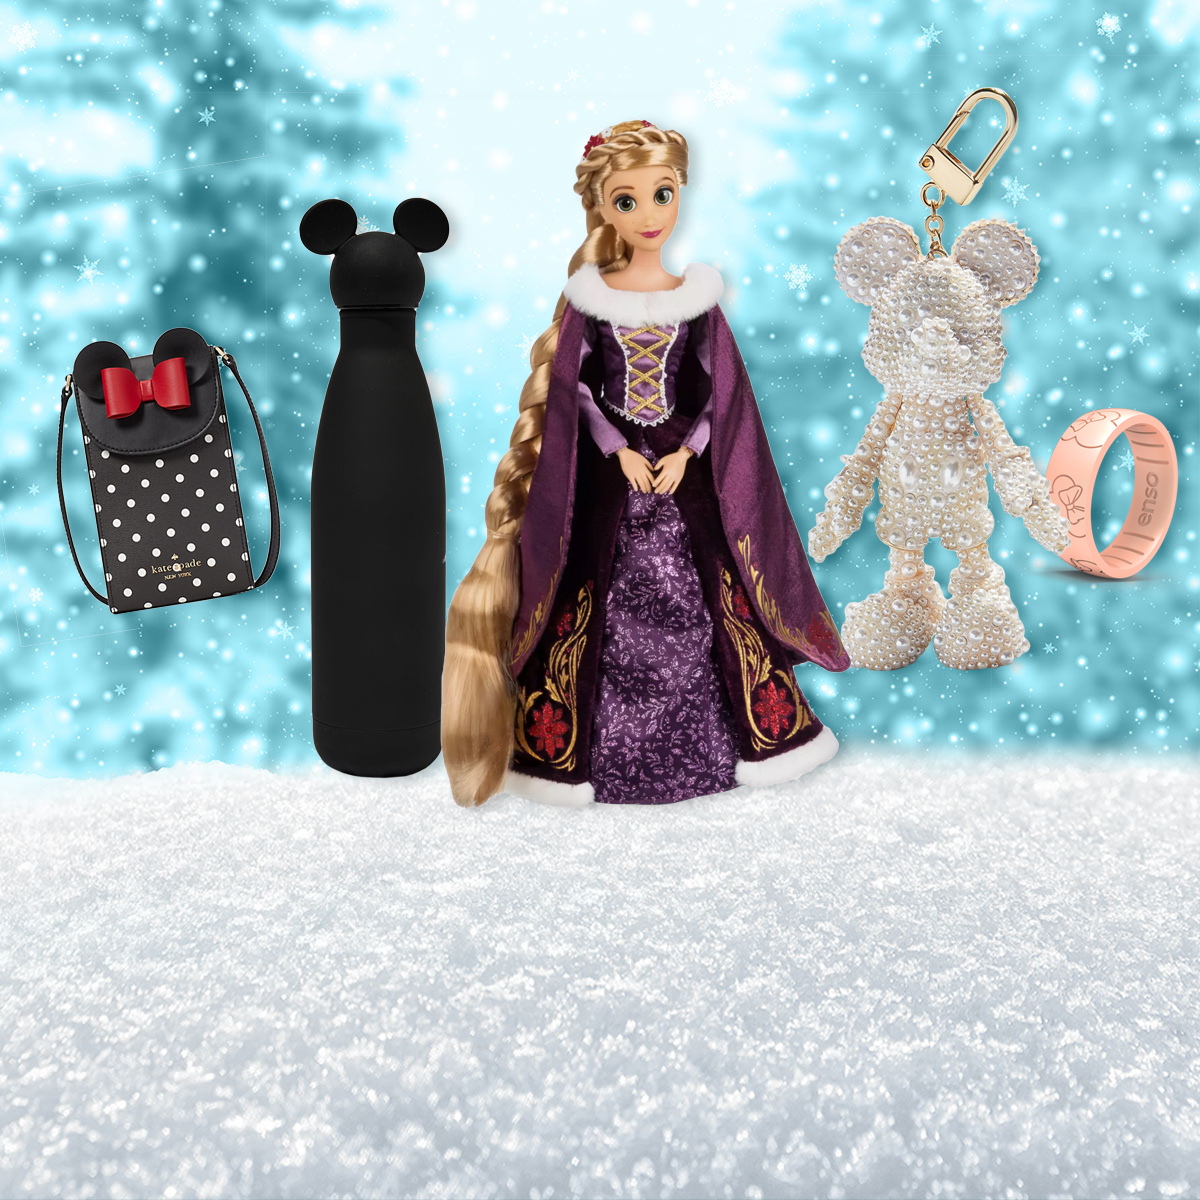 25 Magical Gift Ideas for Disney Fans to Make & Buy